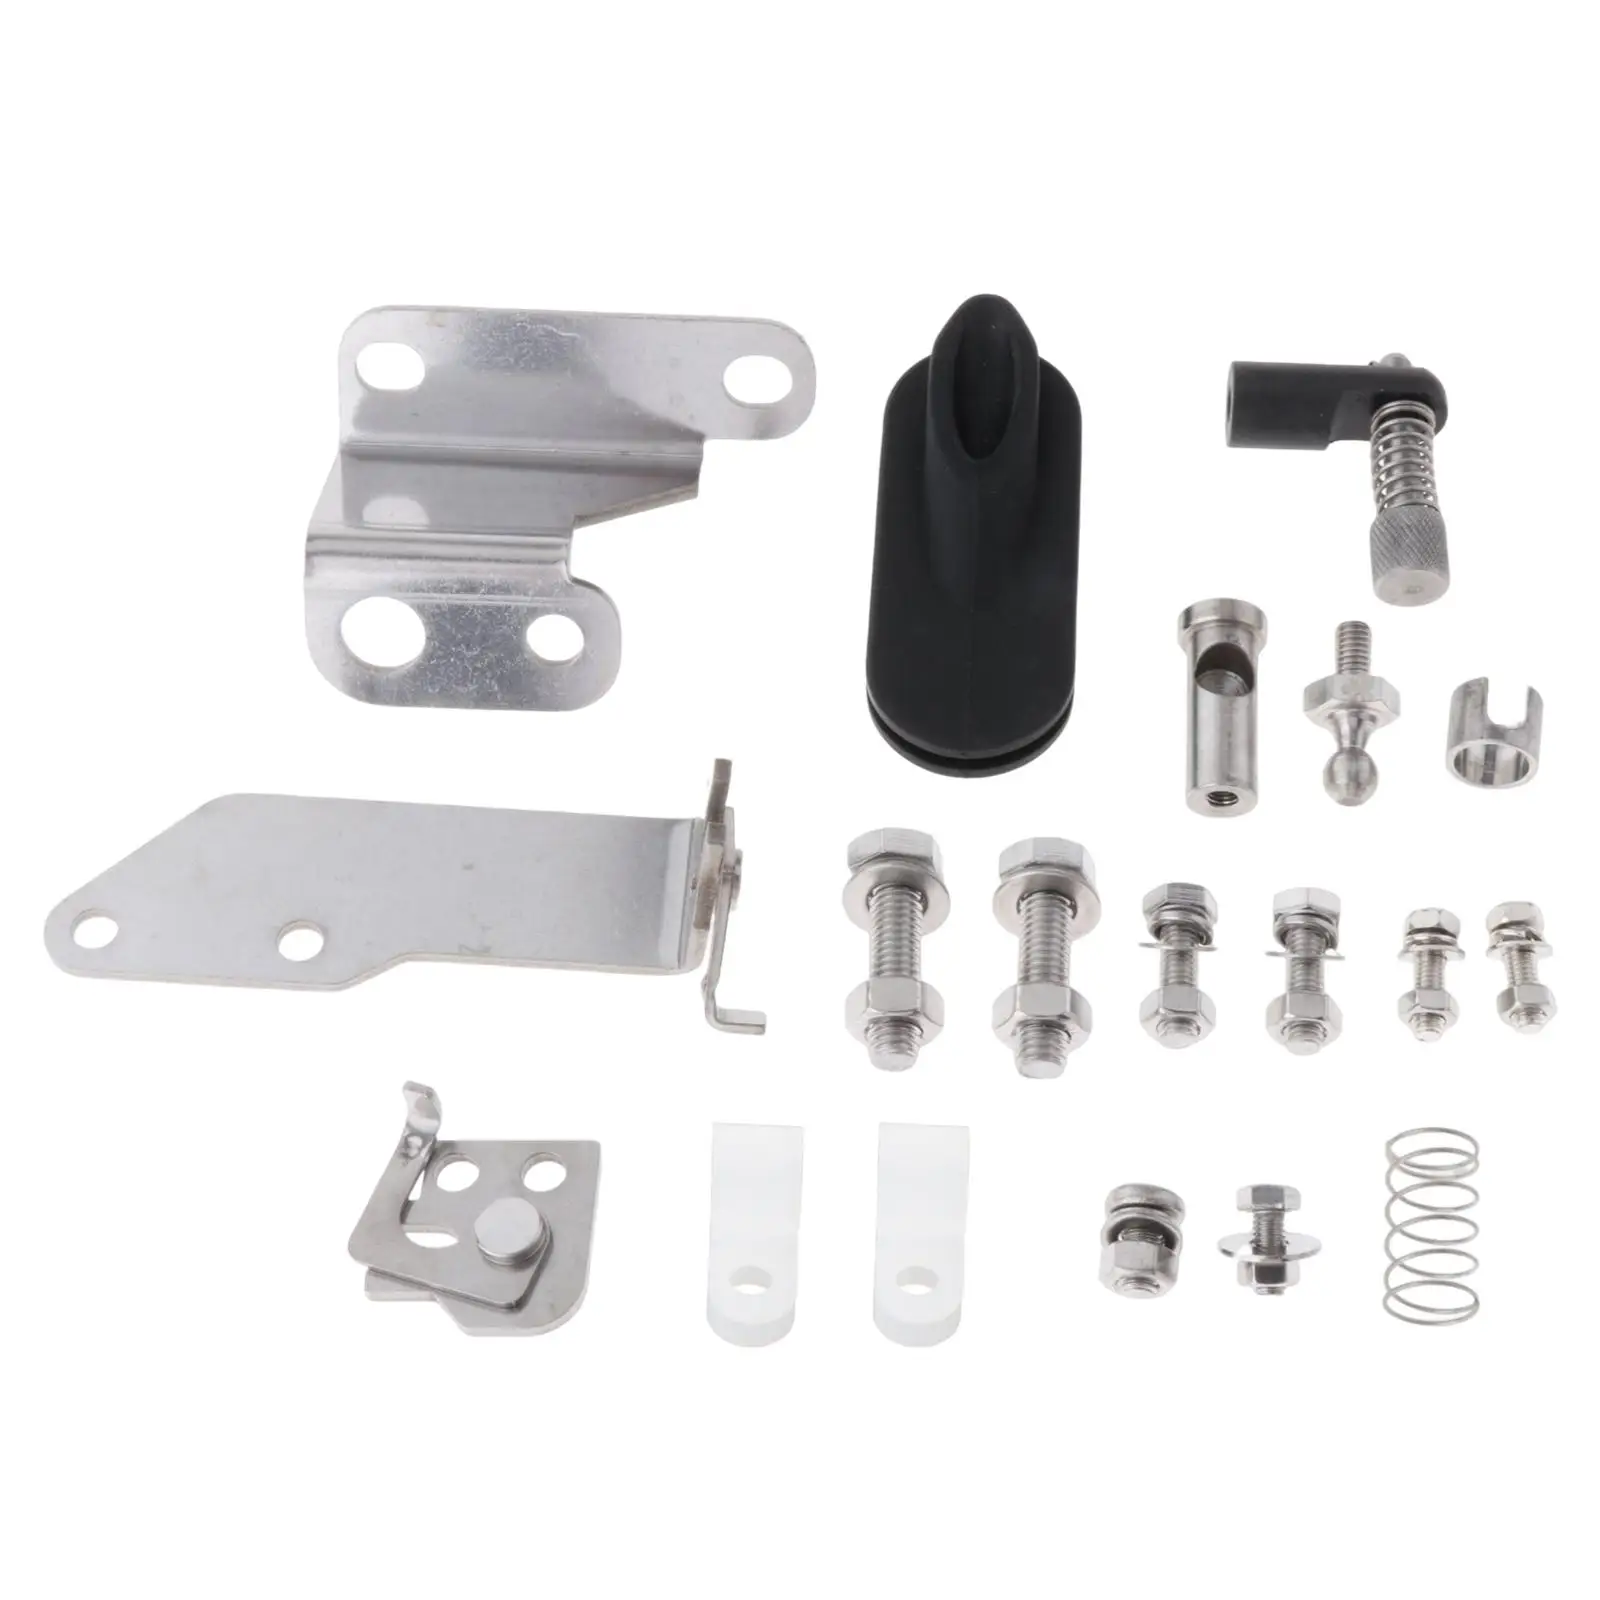 Remote Control Fitting Kit 3A1838801800A0 for  Outboard Motor High 